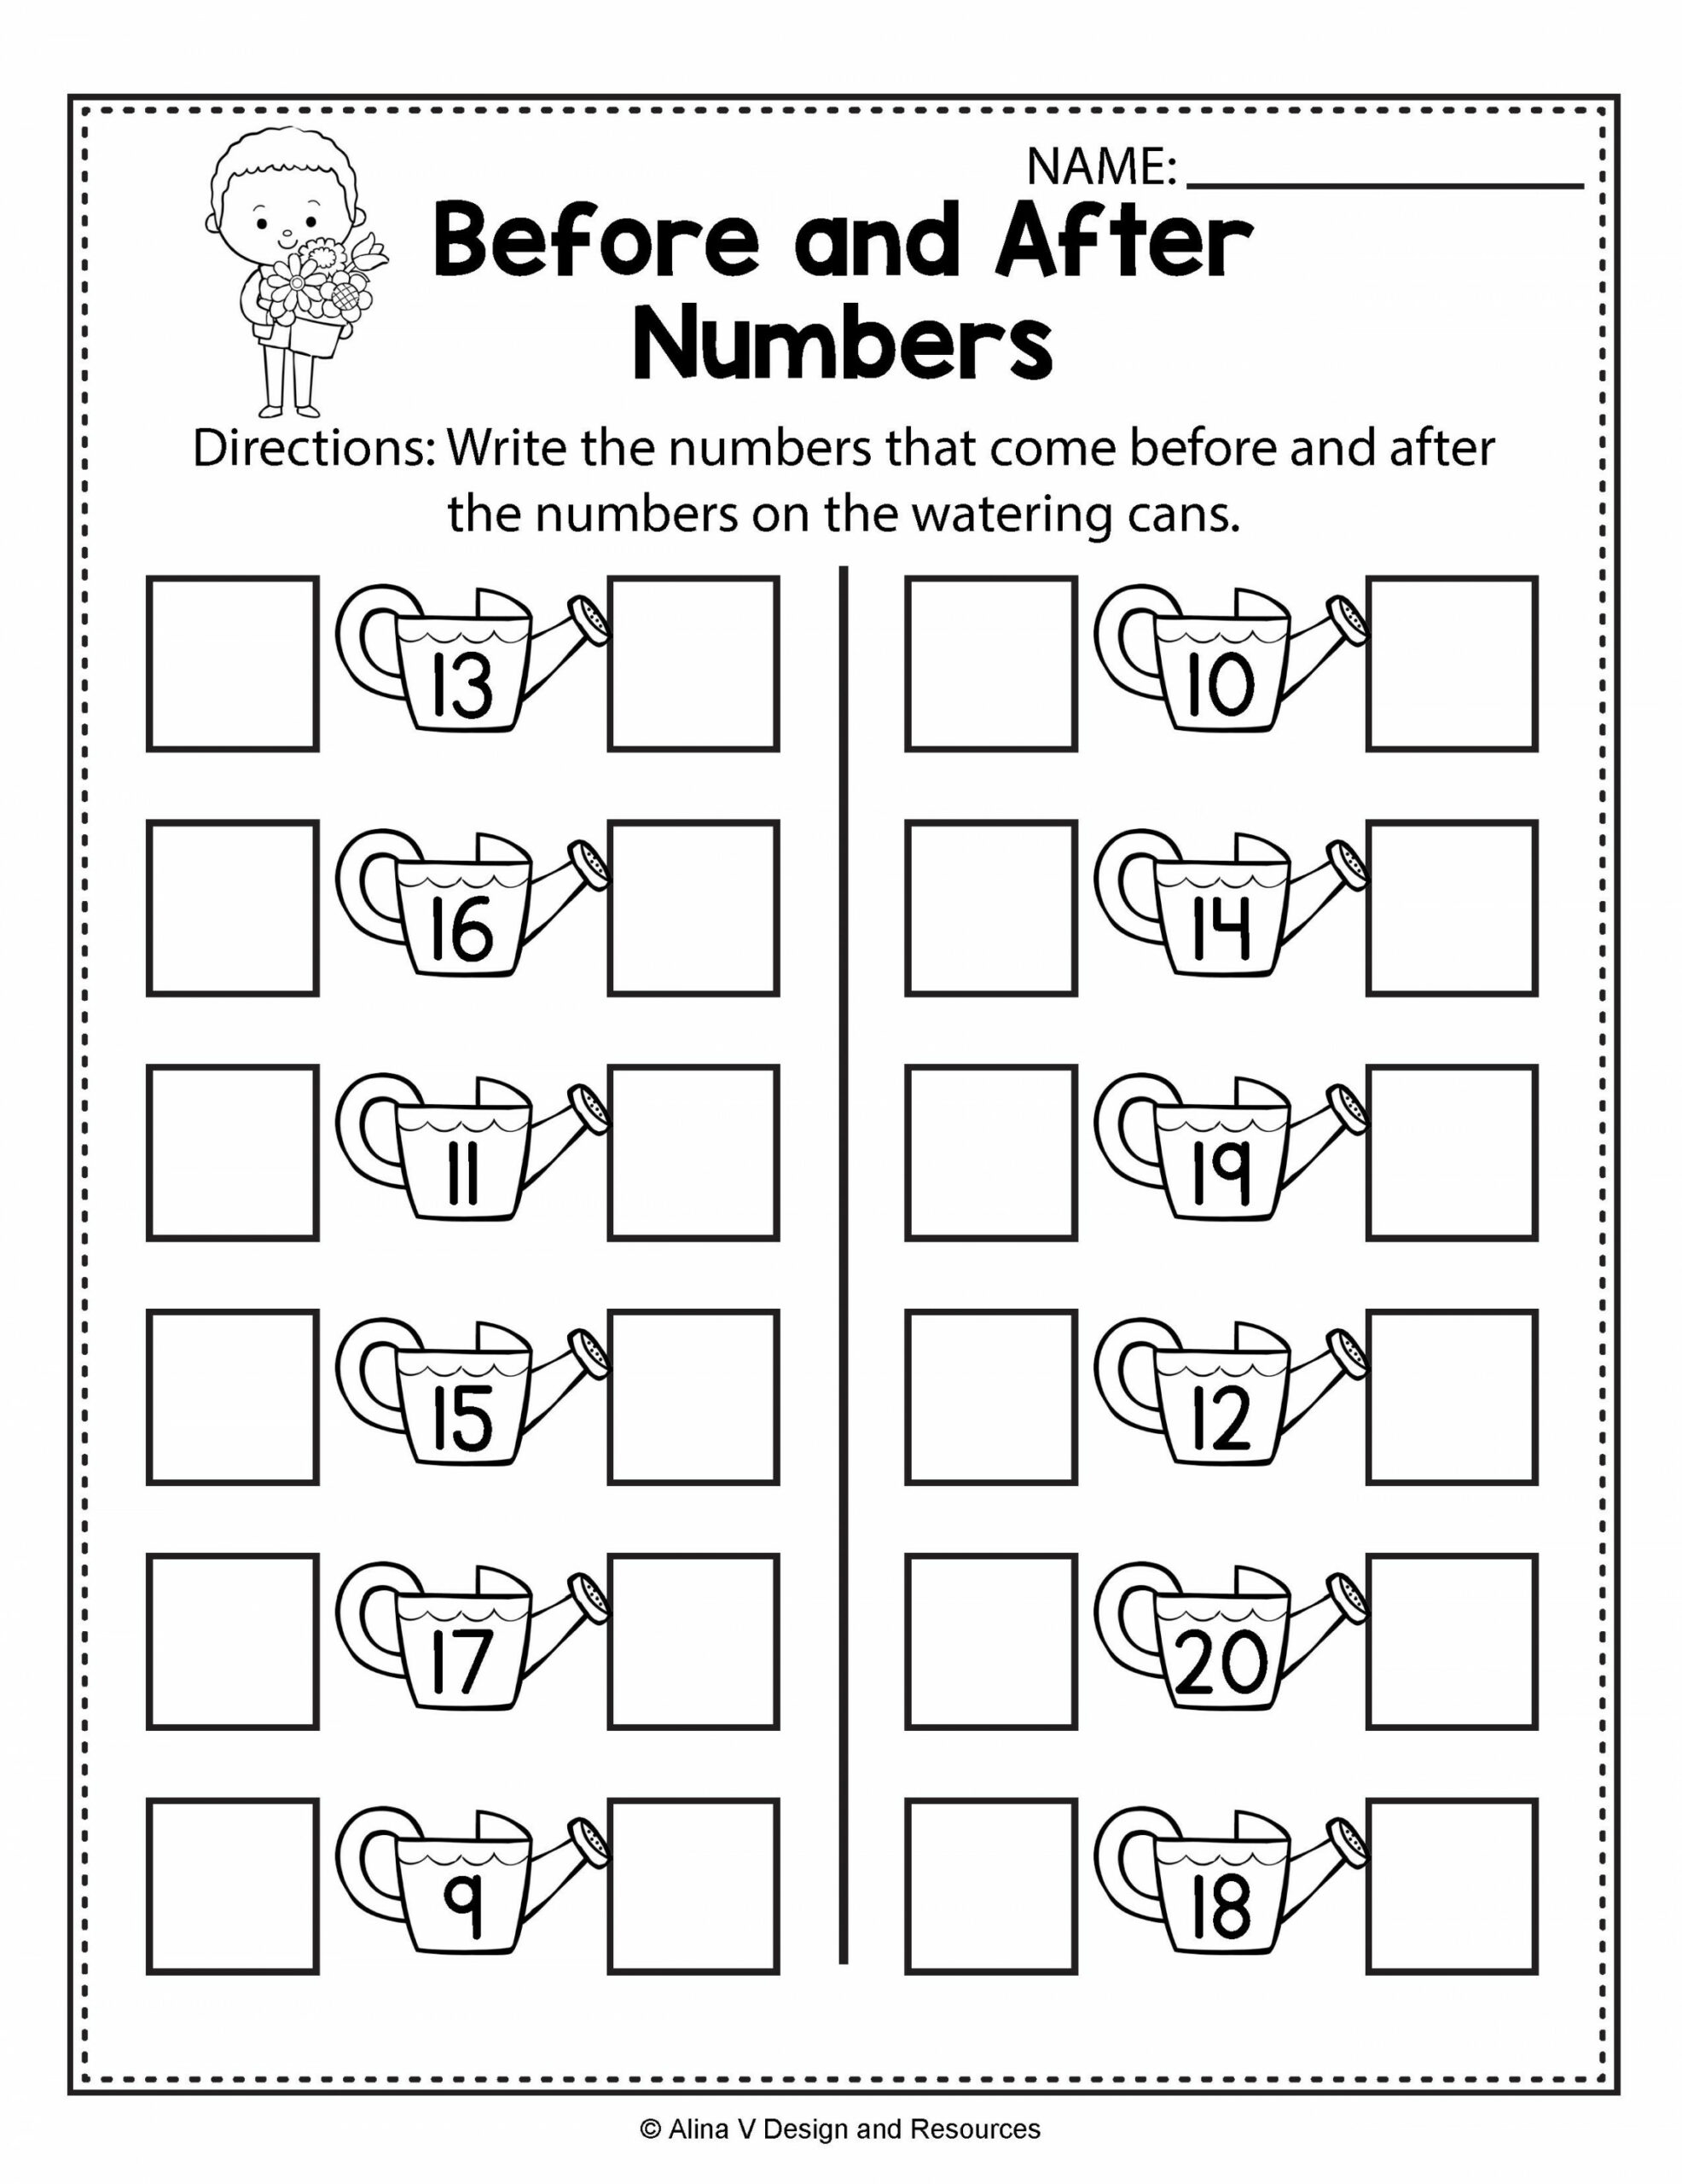 Before and After Numbers - Spring Math Worksheets and activities